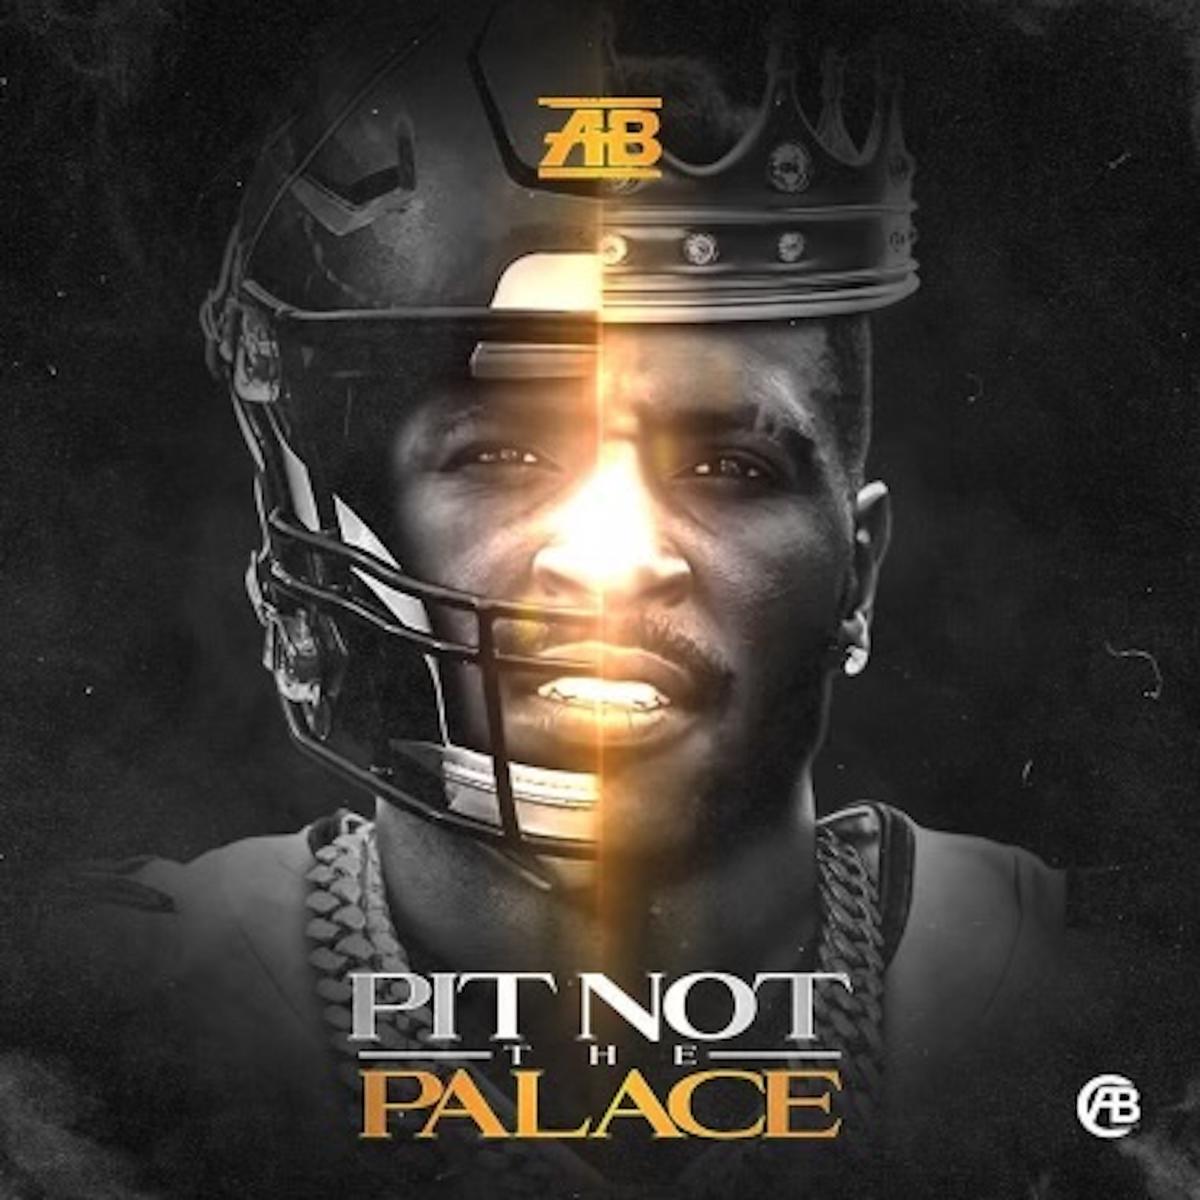 DOWNLOAD MP3: AB - Pit Not The Palace